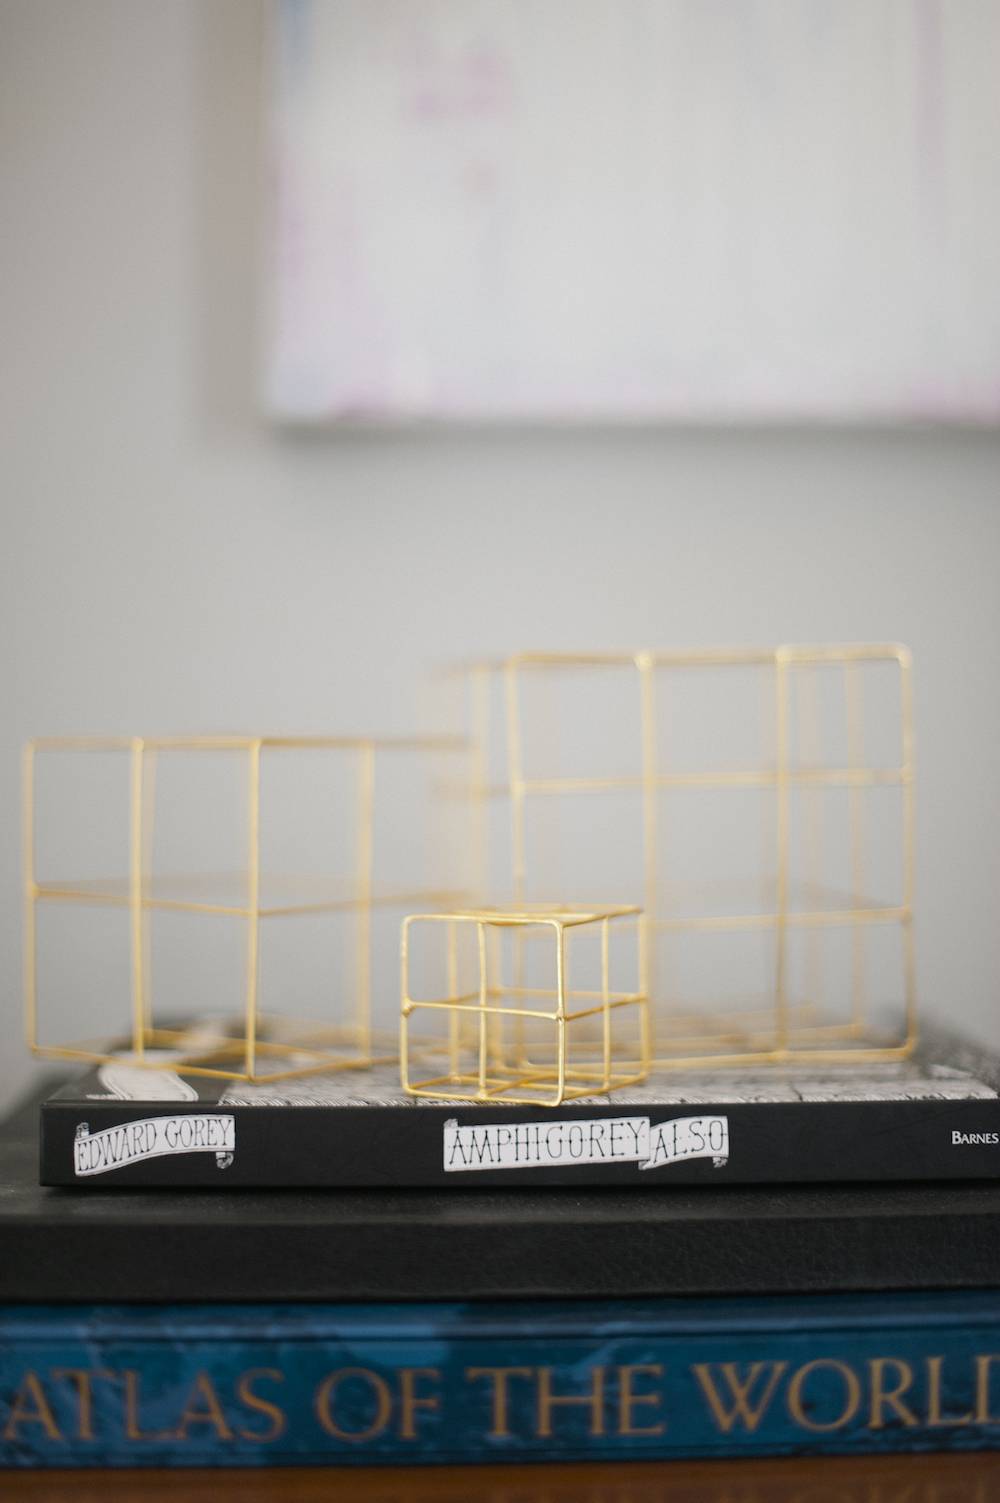 Three cubical frameworks of different sizes, made out of sticks which work as styling accessories.